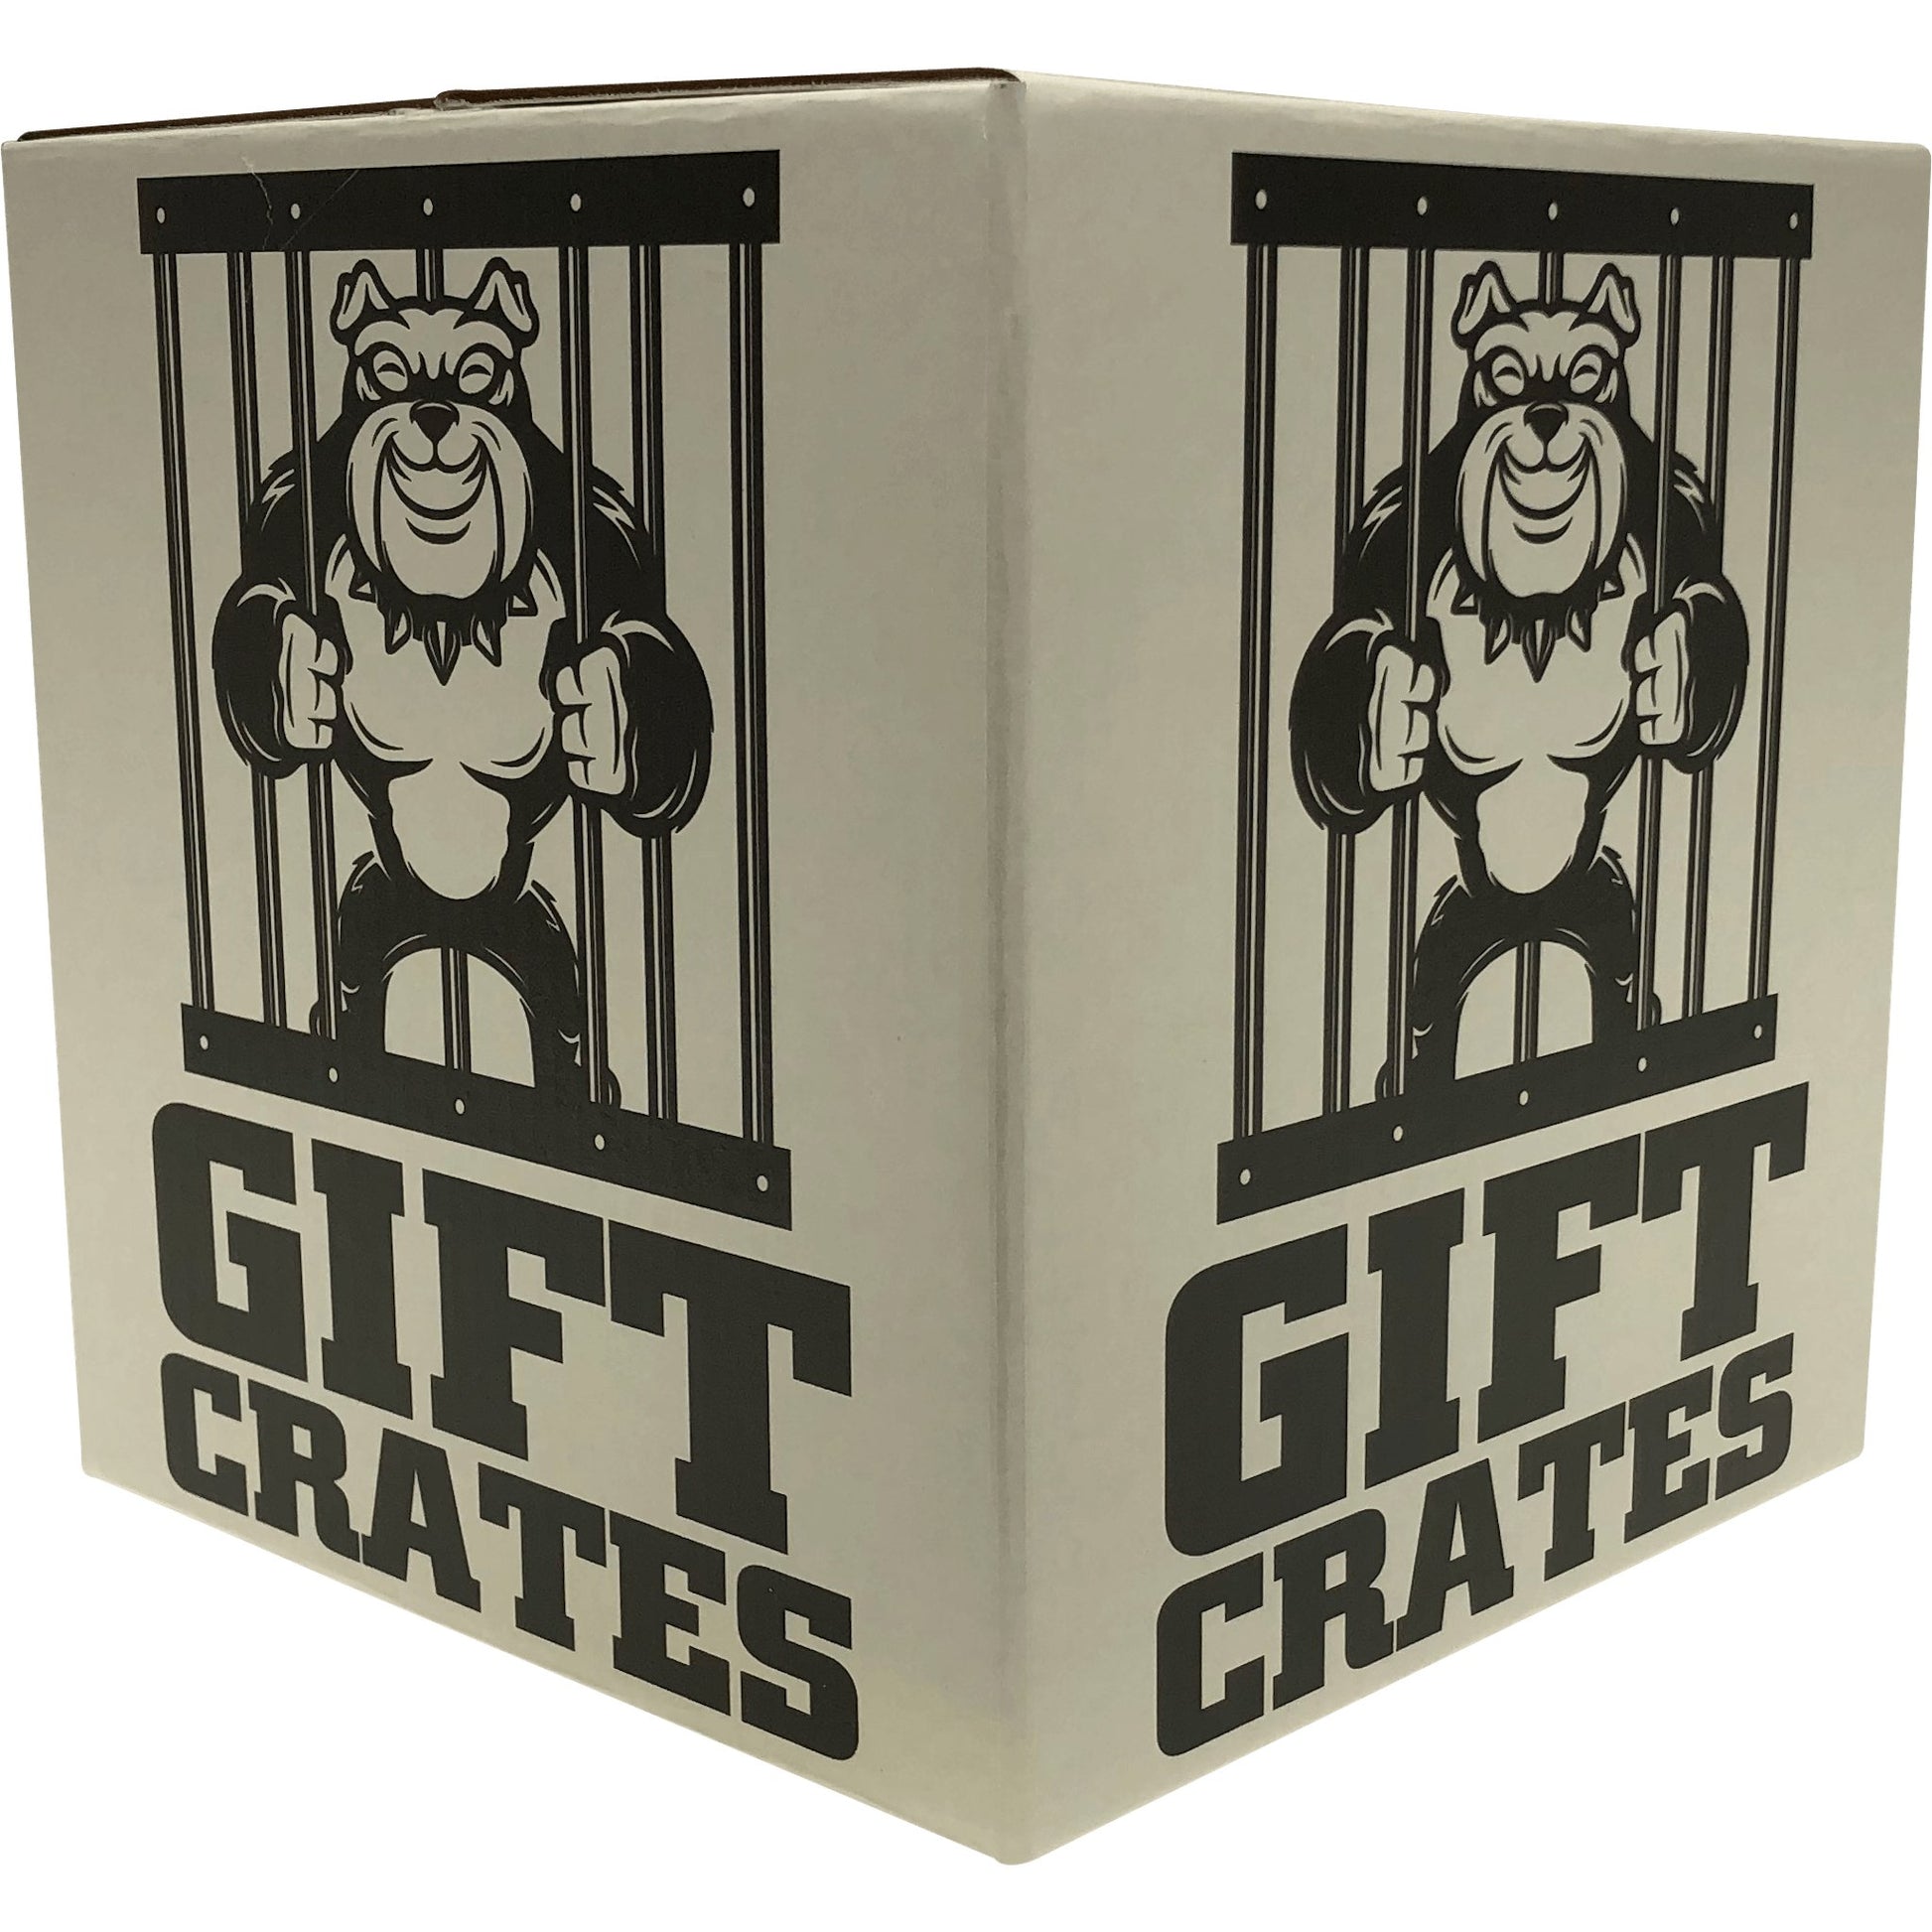 Barbecue Crate - Gift Crates